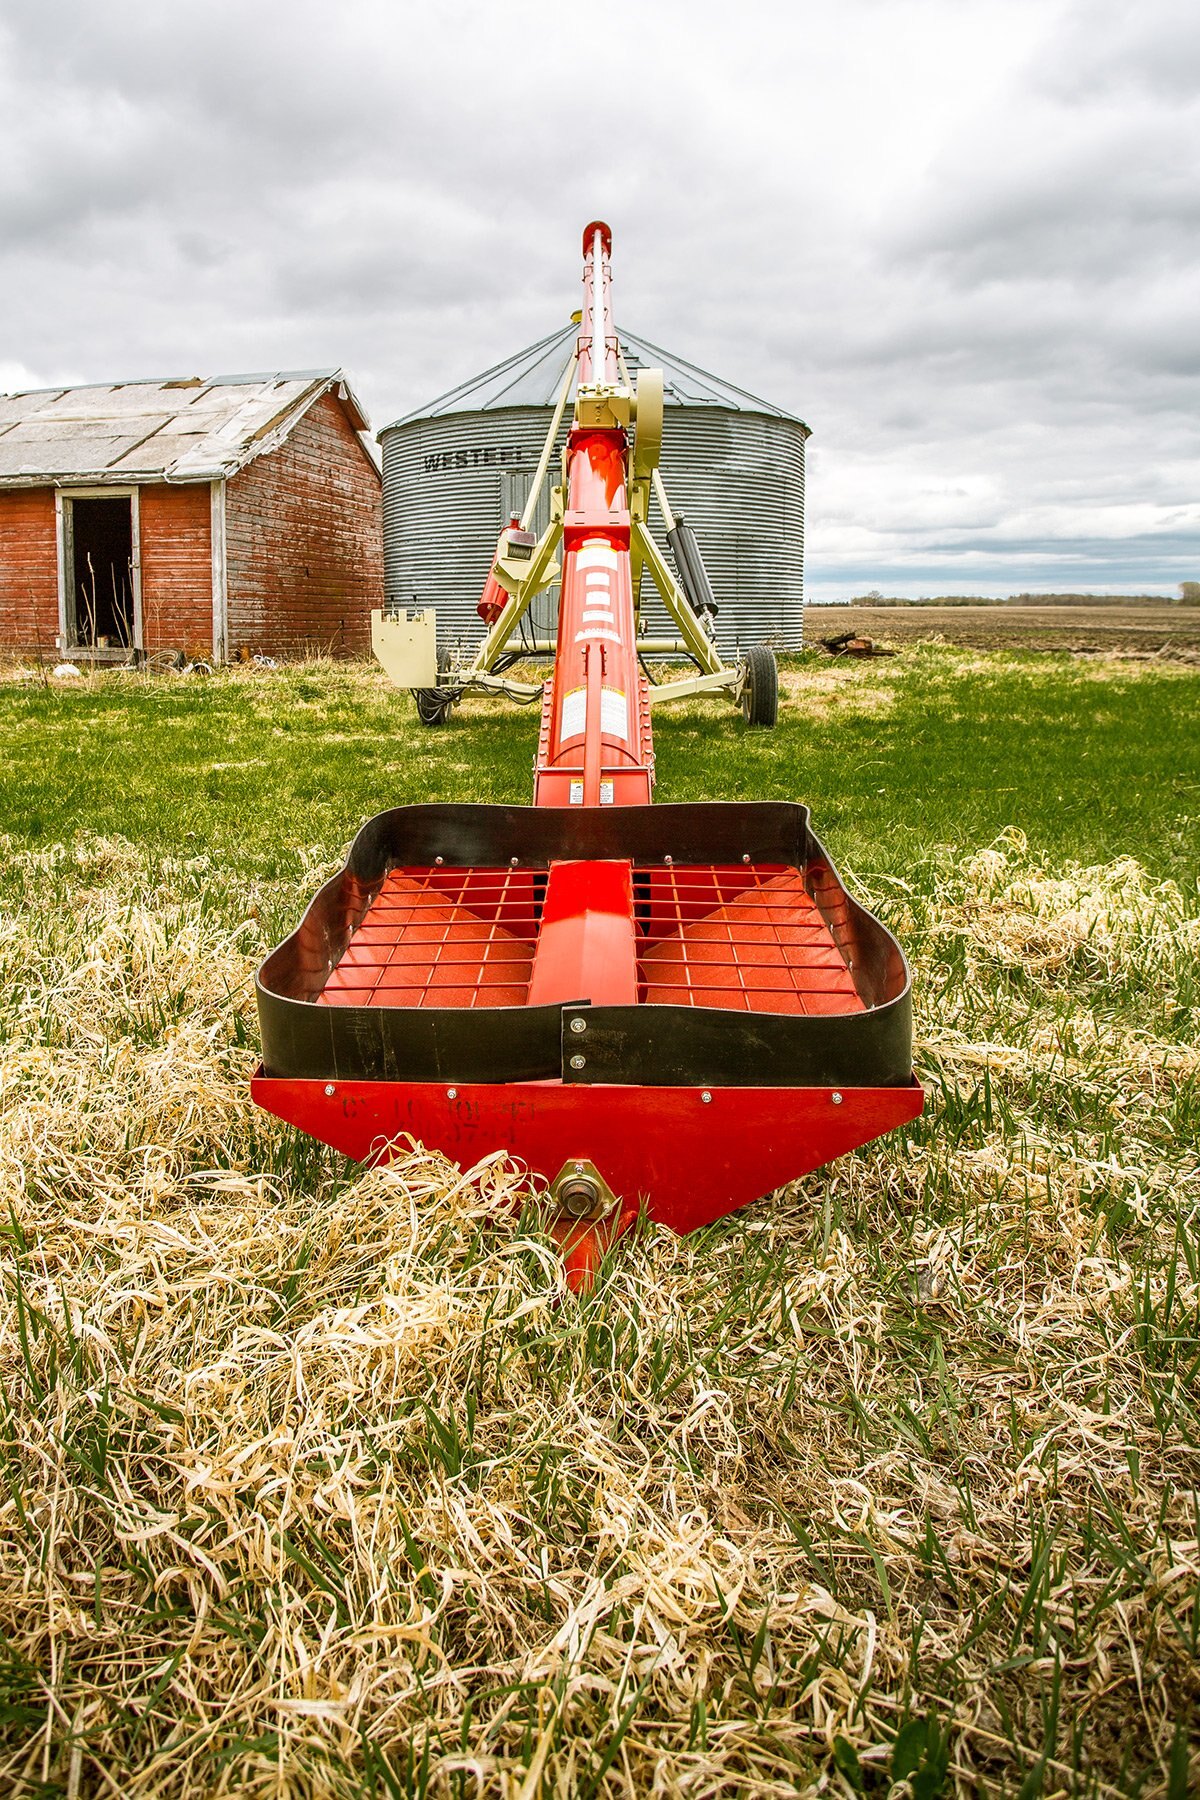 Farm king CONVENTIONAL AUGER SERIES